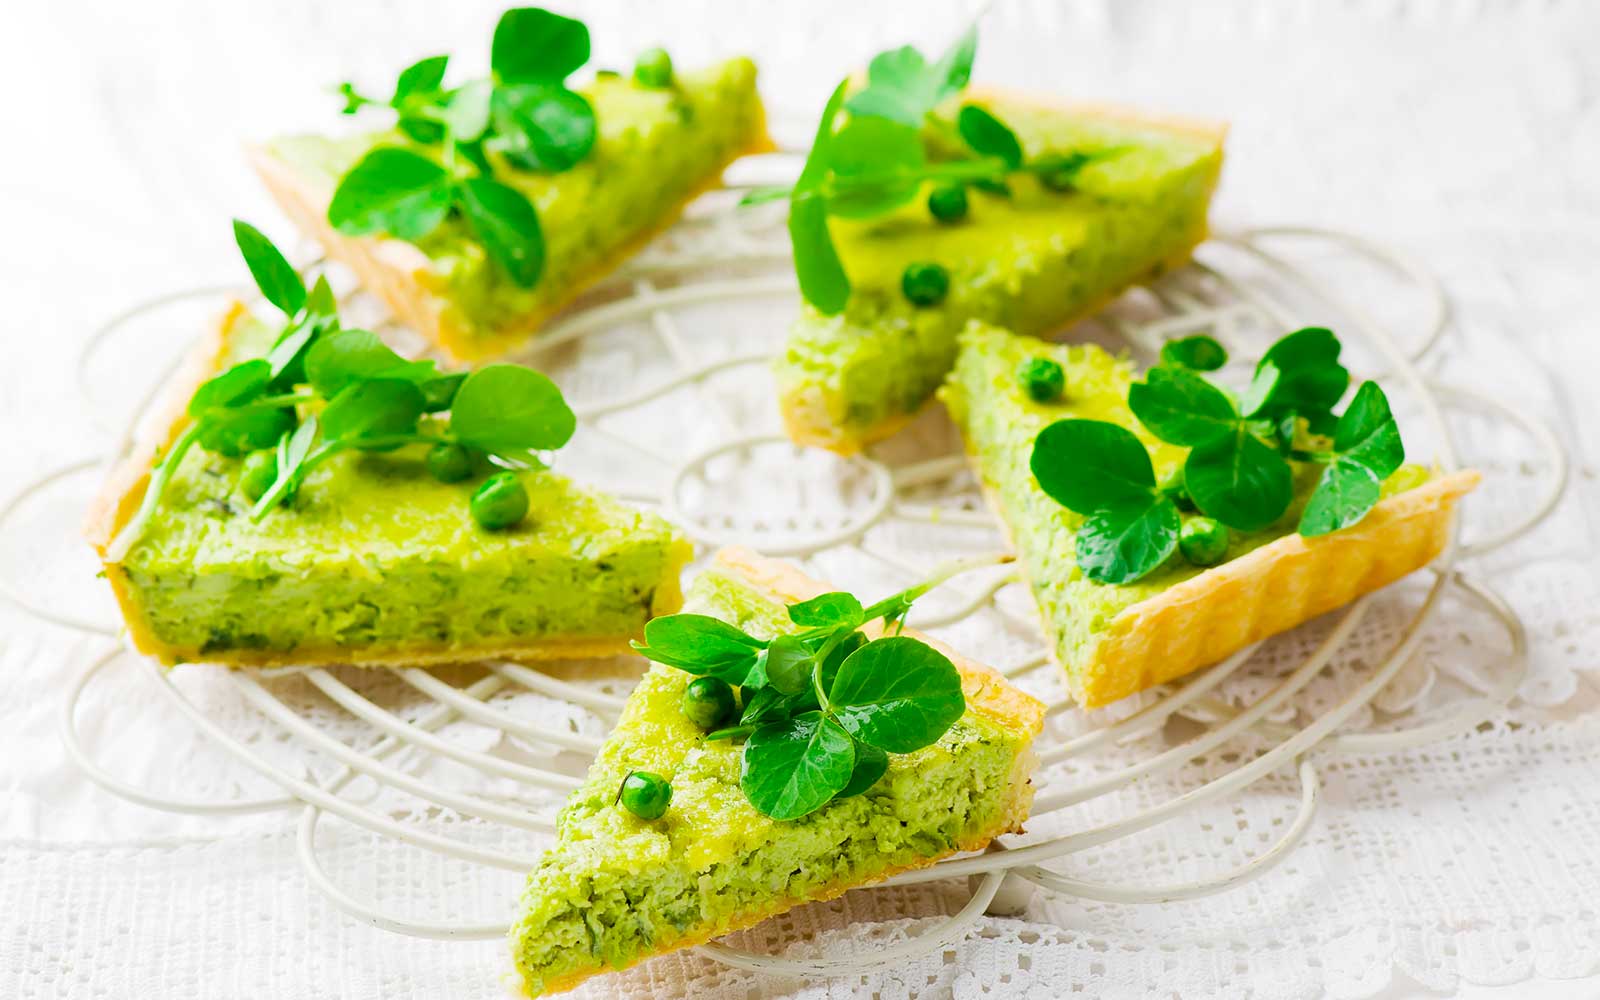 5 tasty ideas for an aperitif with peas